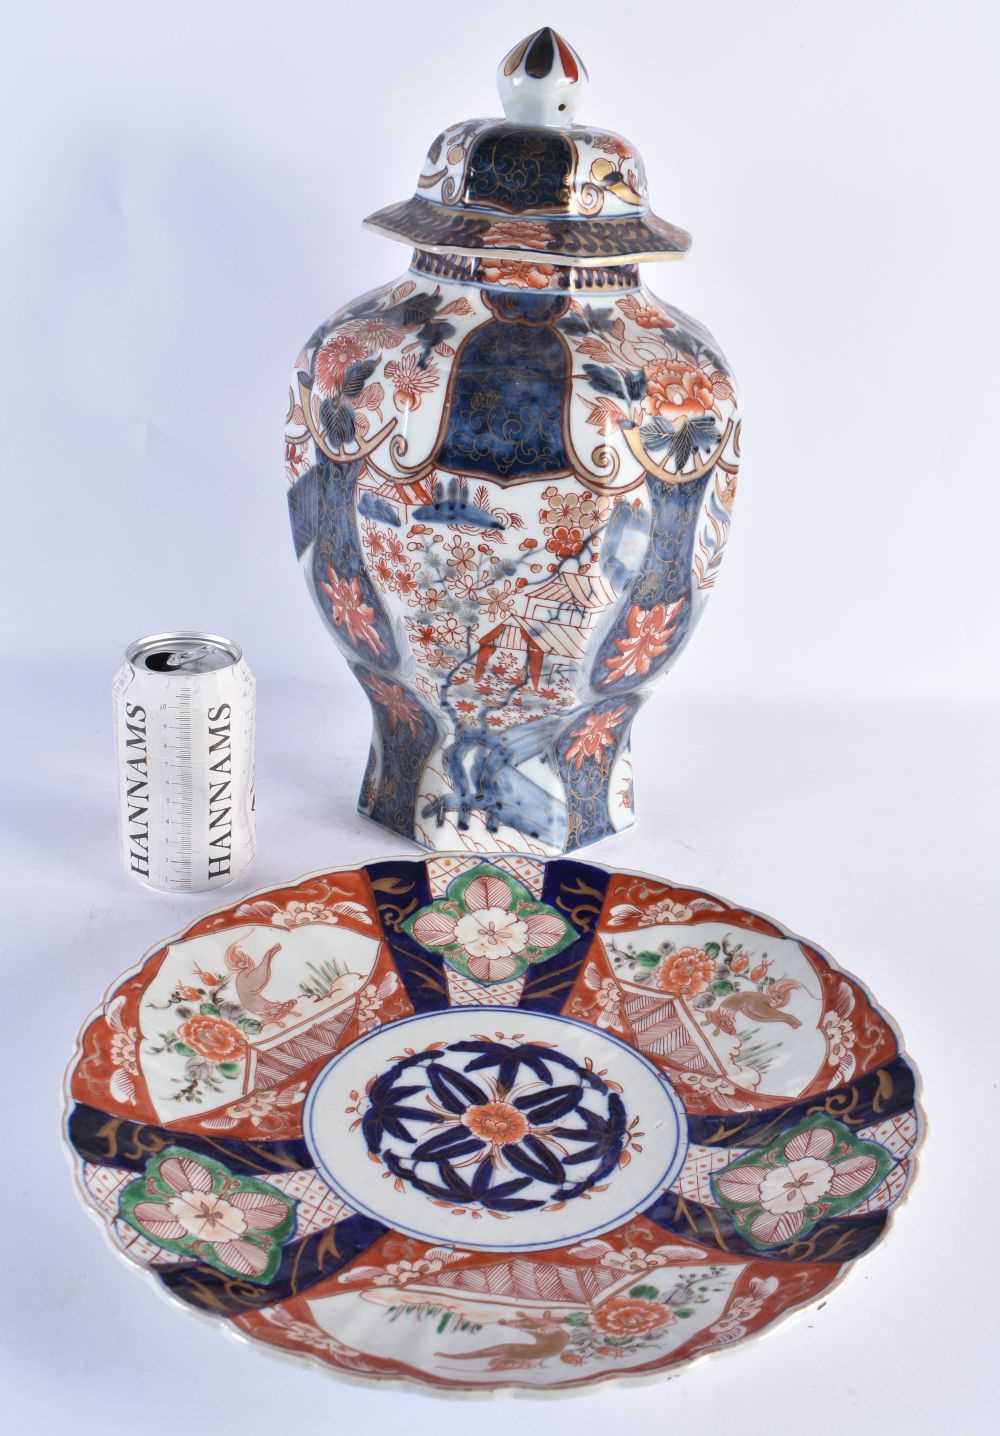 A LARGE 18TH CENTURY JAPANESE EDO PERIOD IMARI VASE AND COVER painted with landscapes, together with